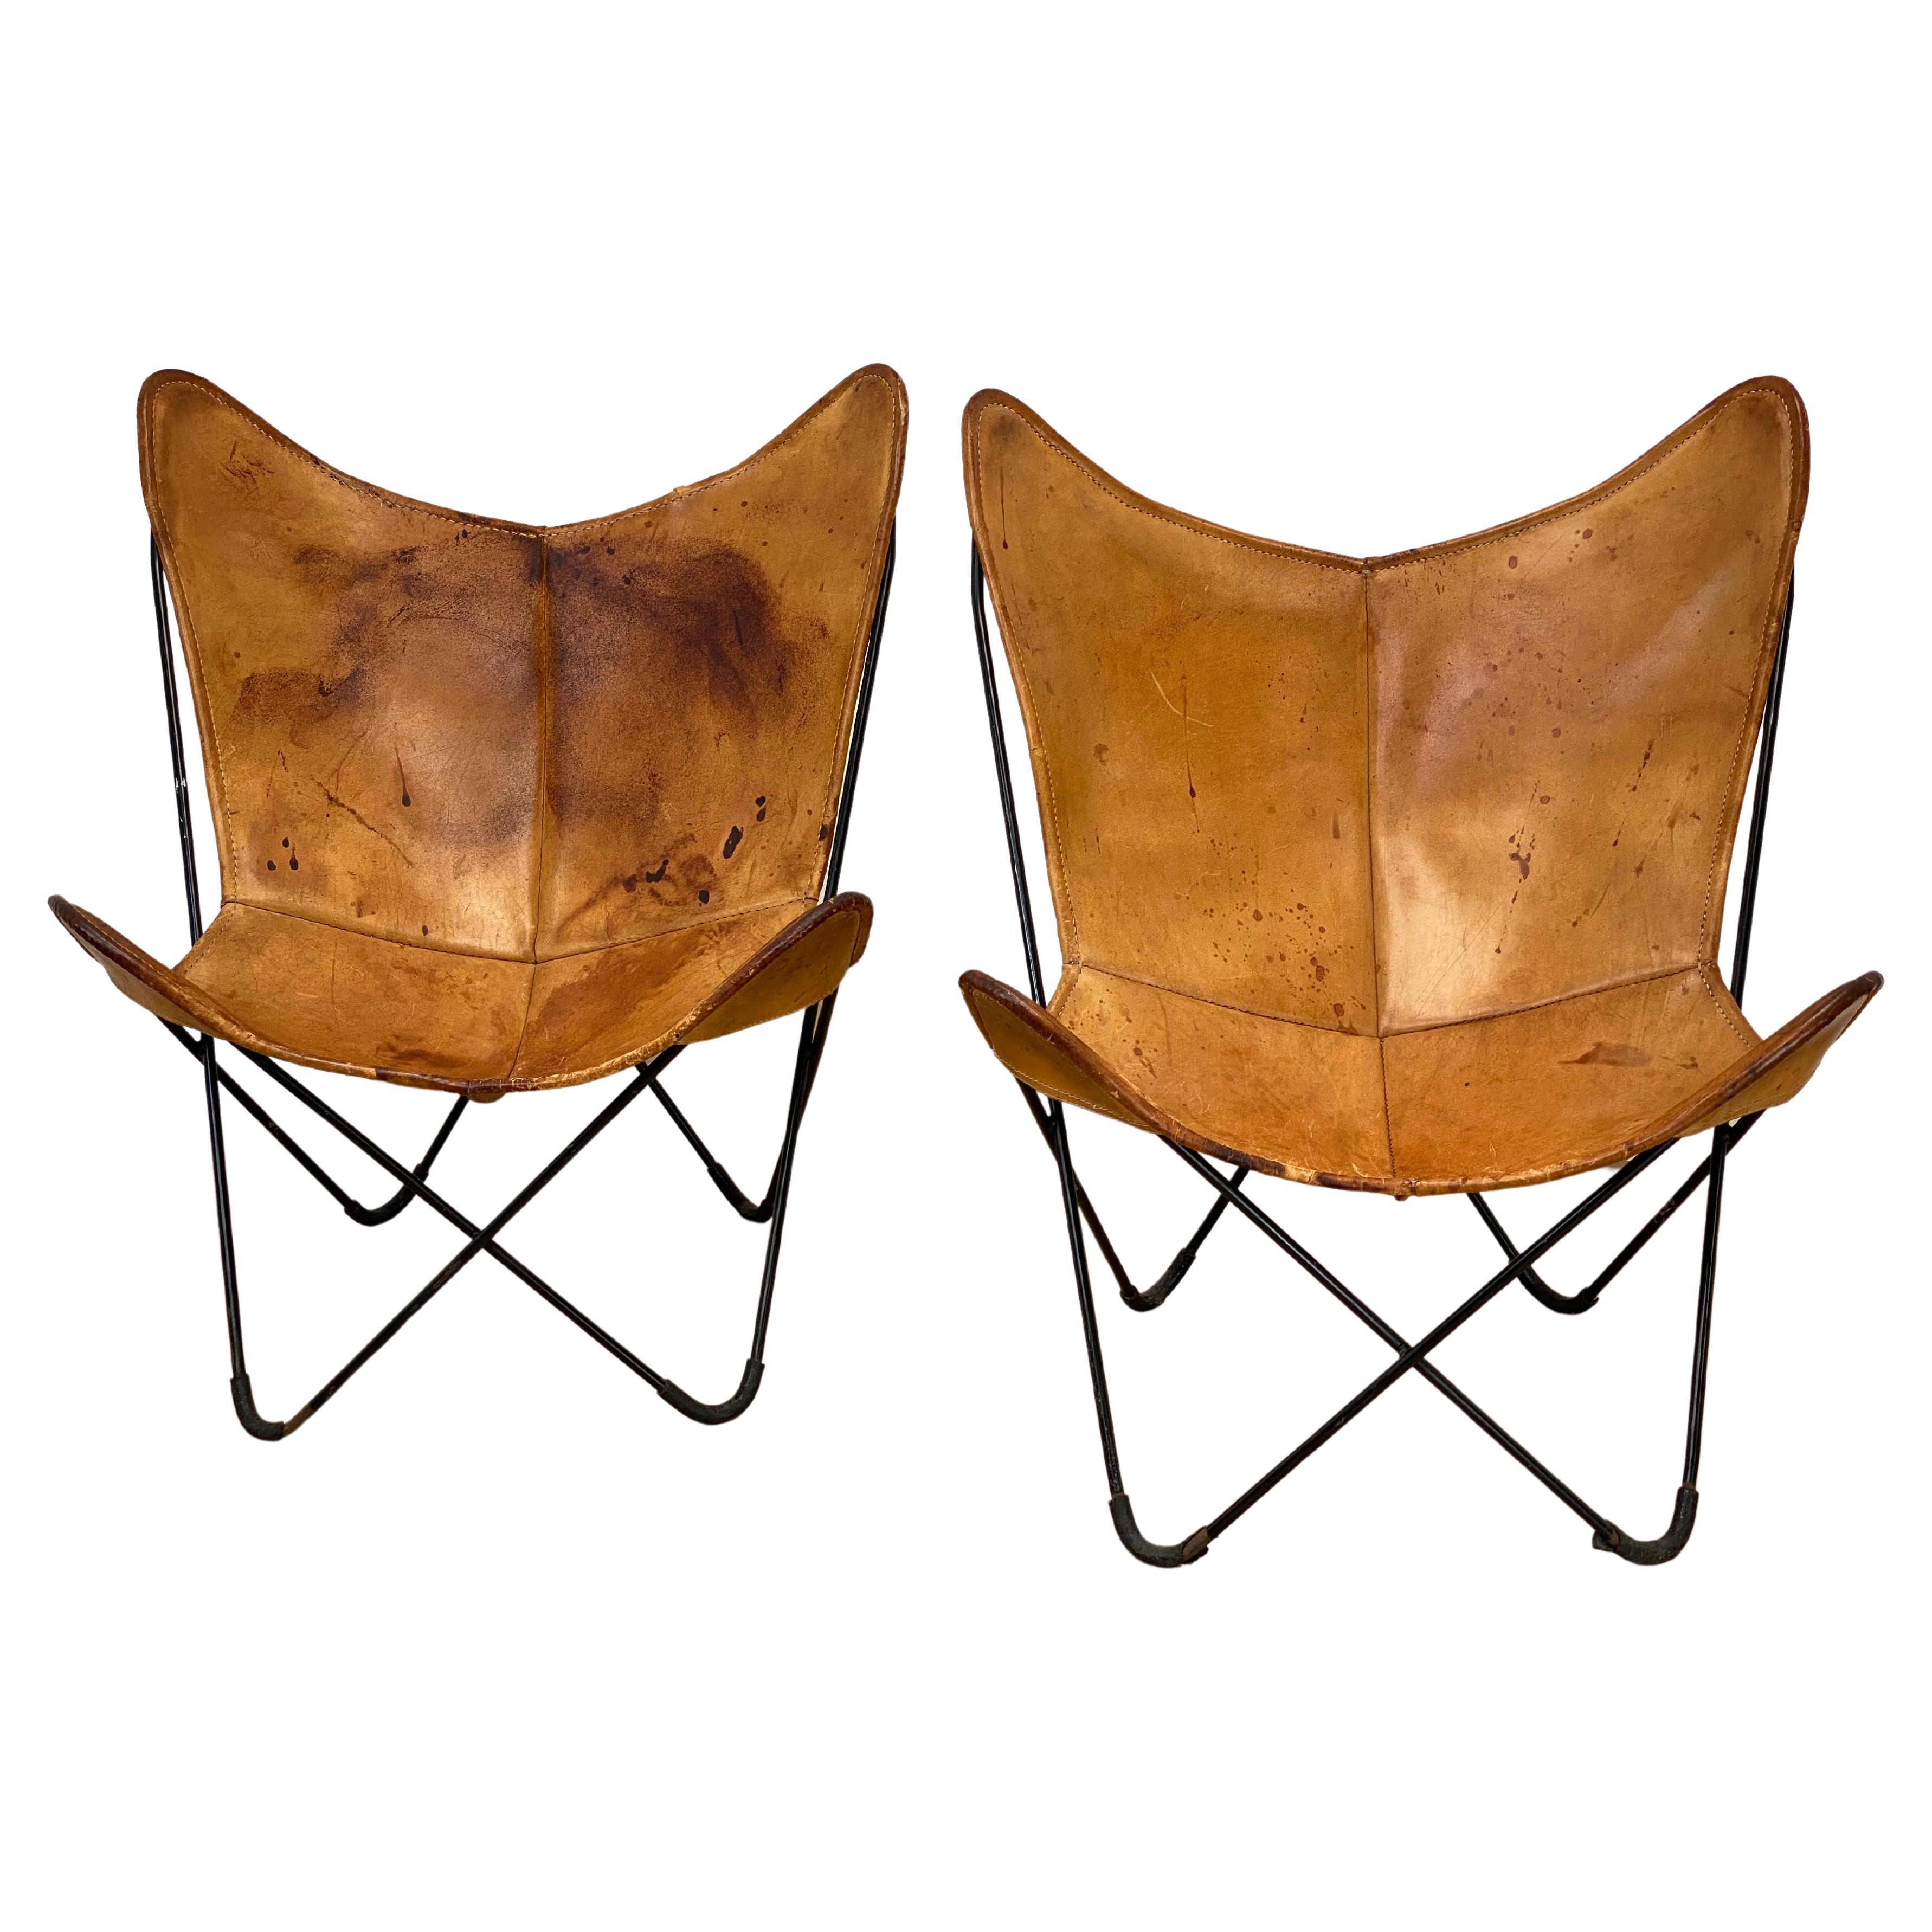 When were butterfly chairs popular?